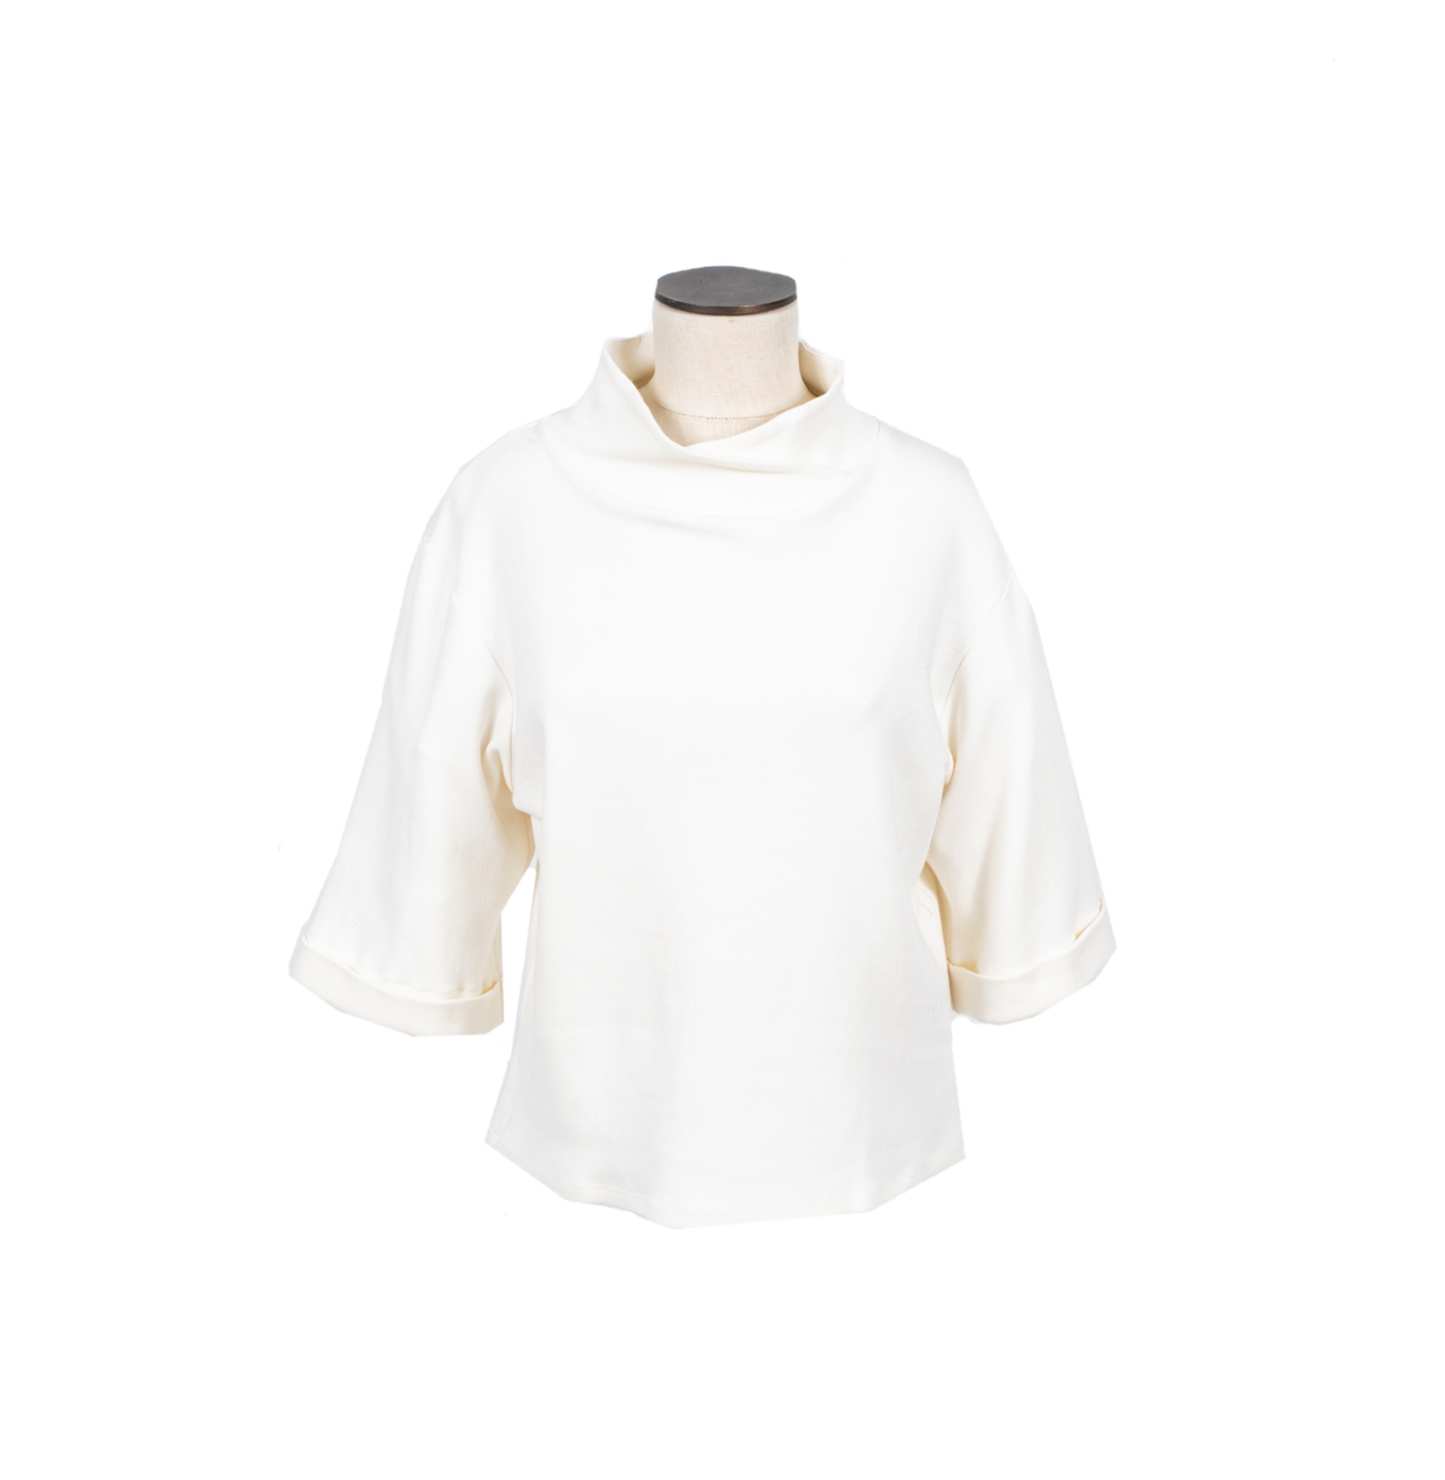 Ivory white sweater with short sleeves and fold over collar